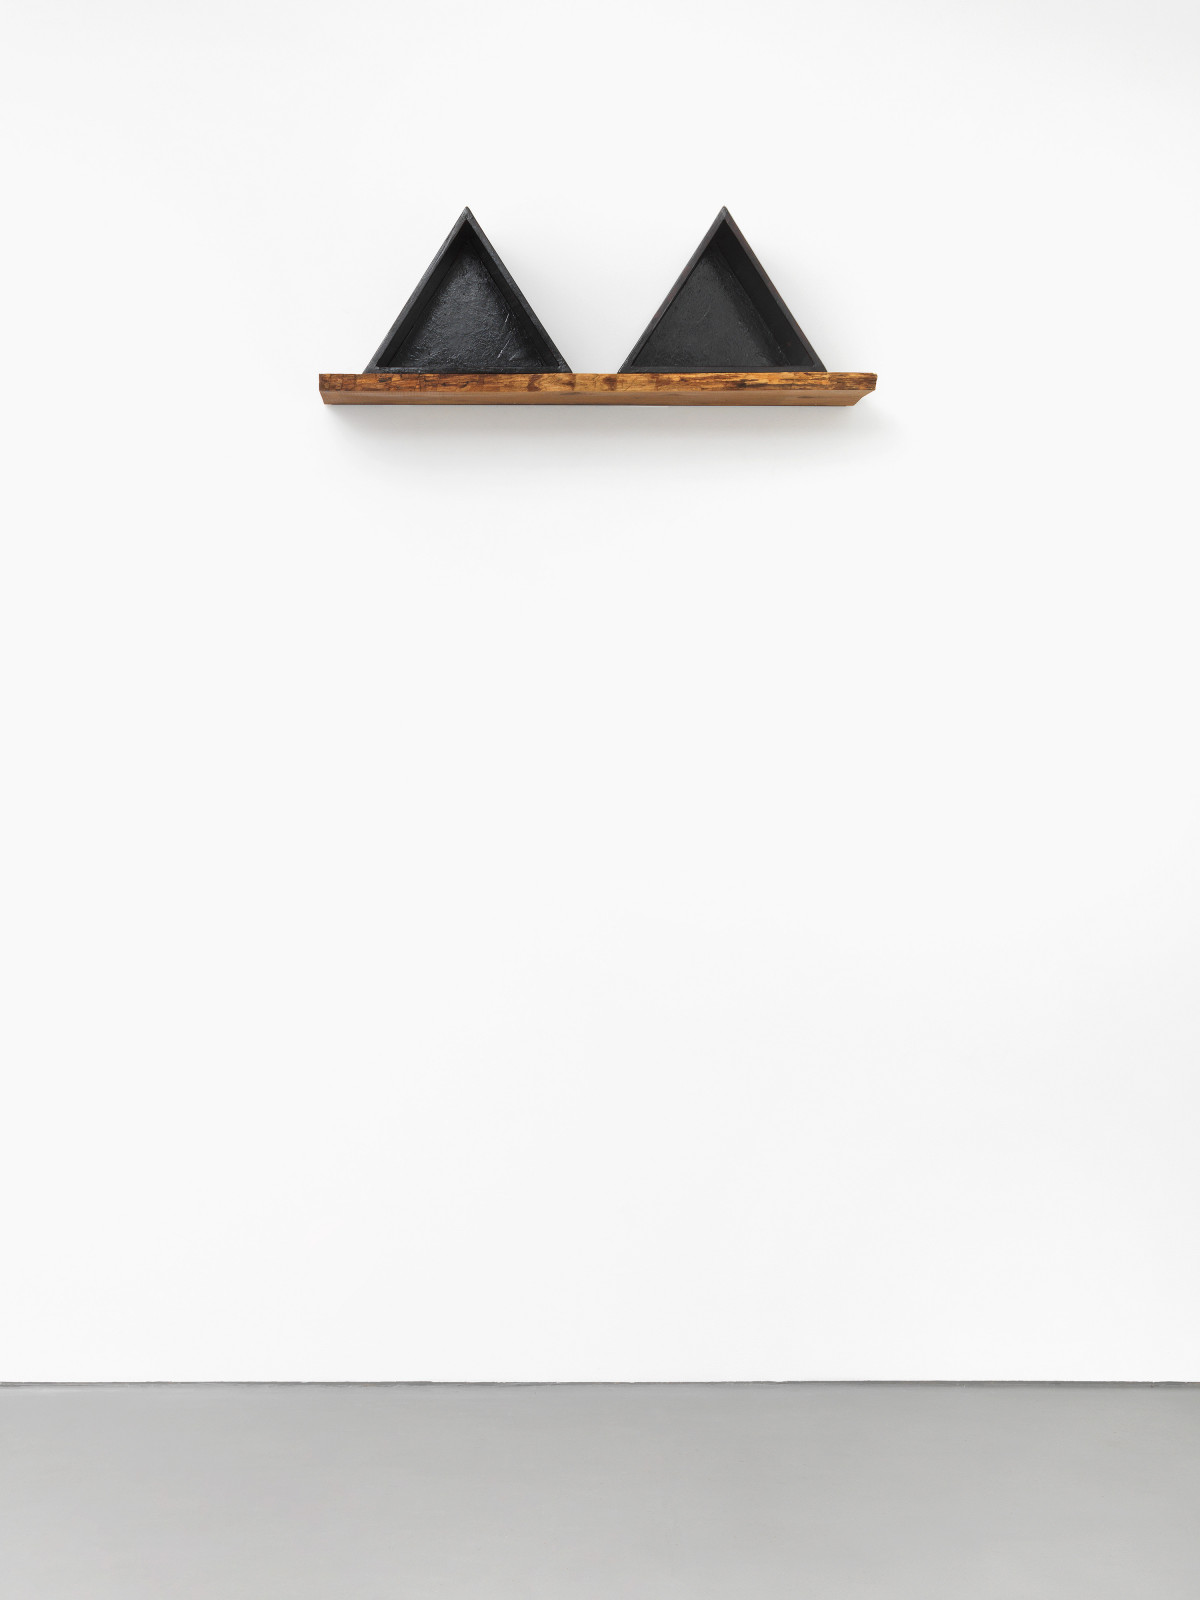 Wolfgang Laib, ‘Untitled’, 2015, Black Burmese lacquer on wood